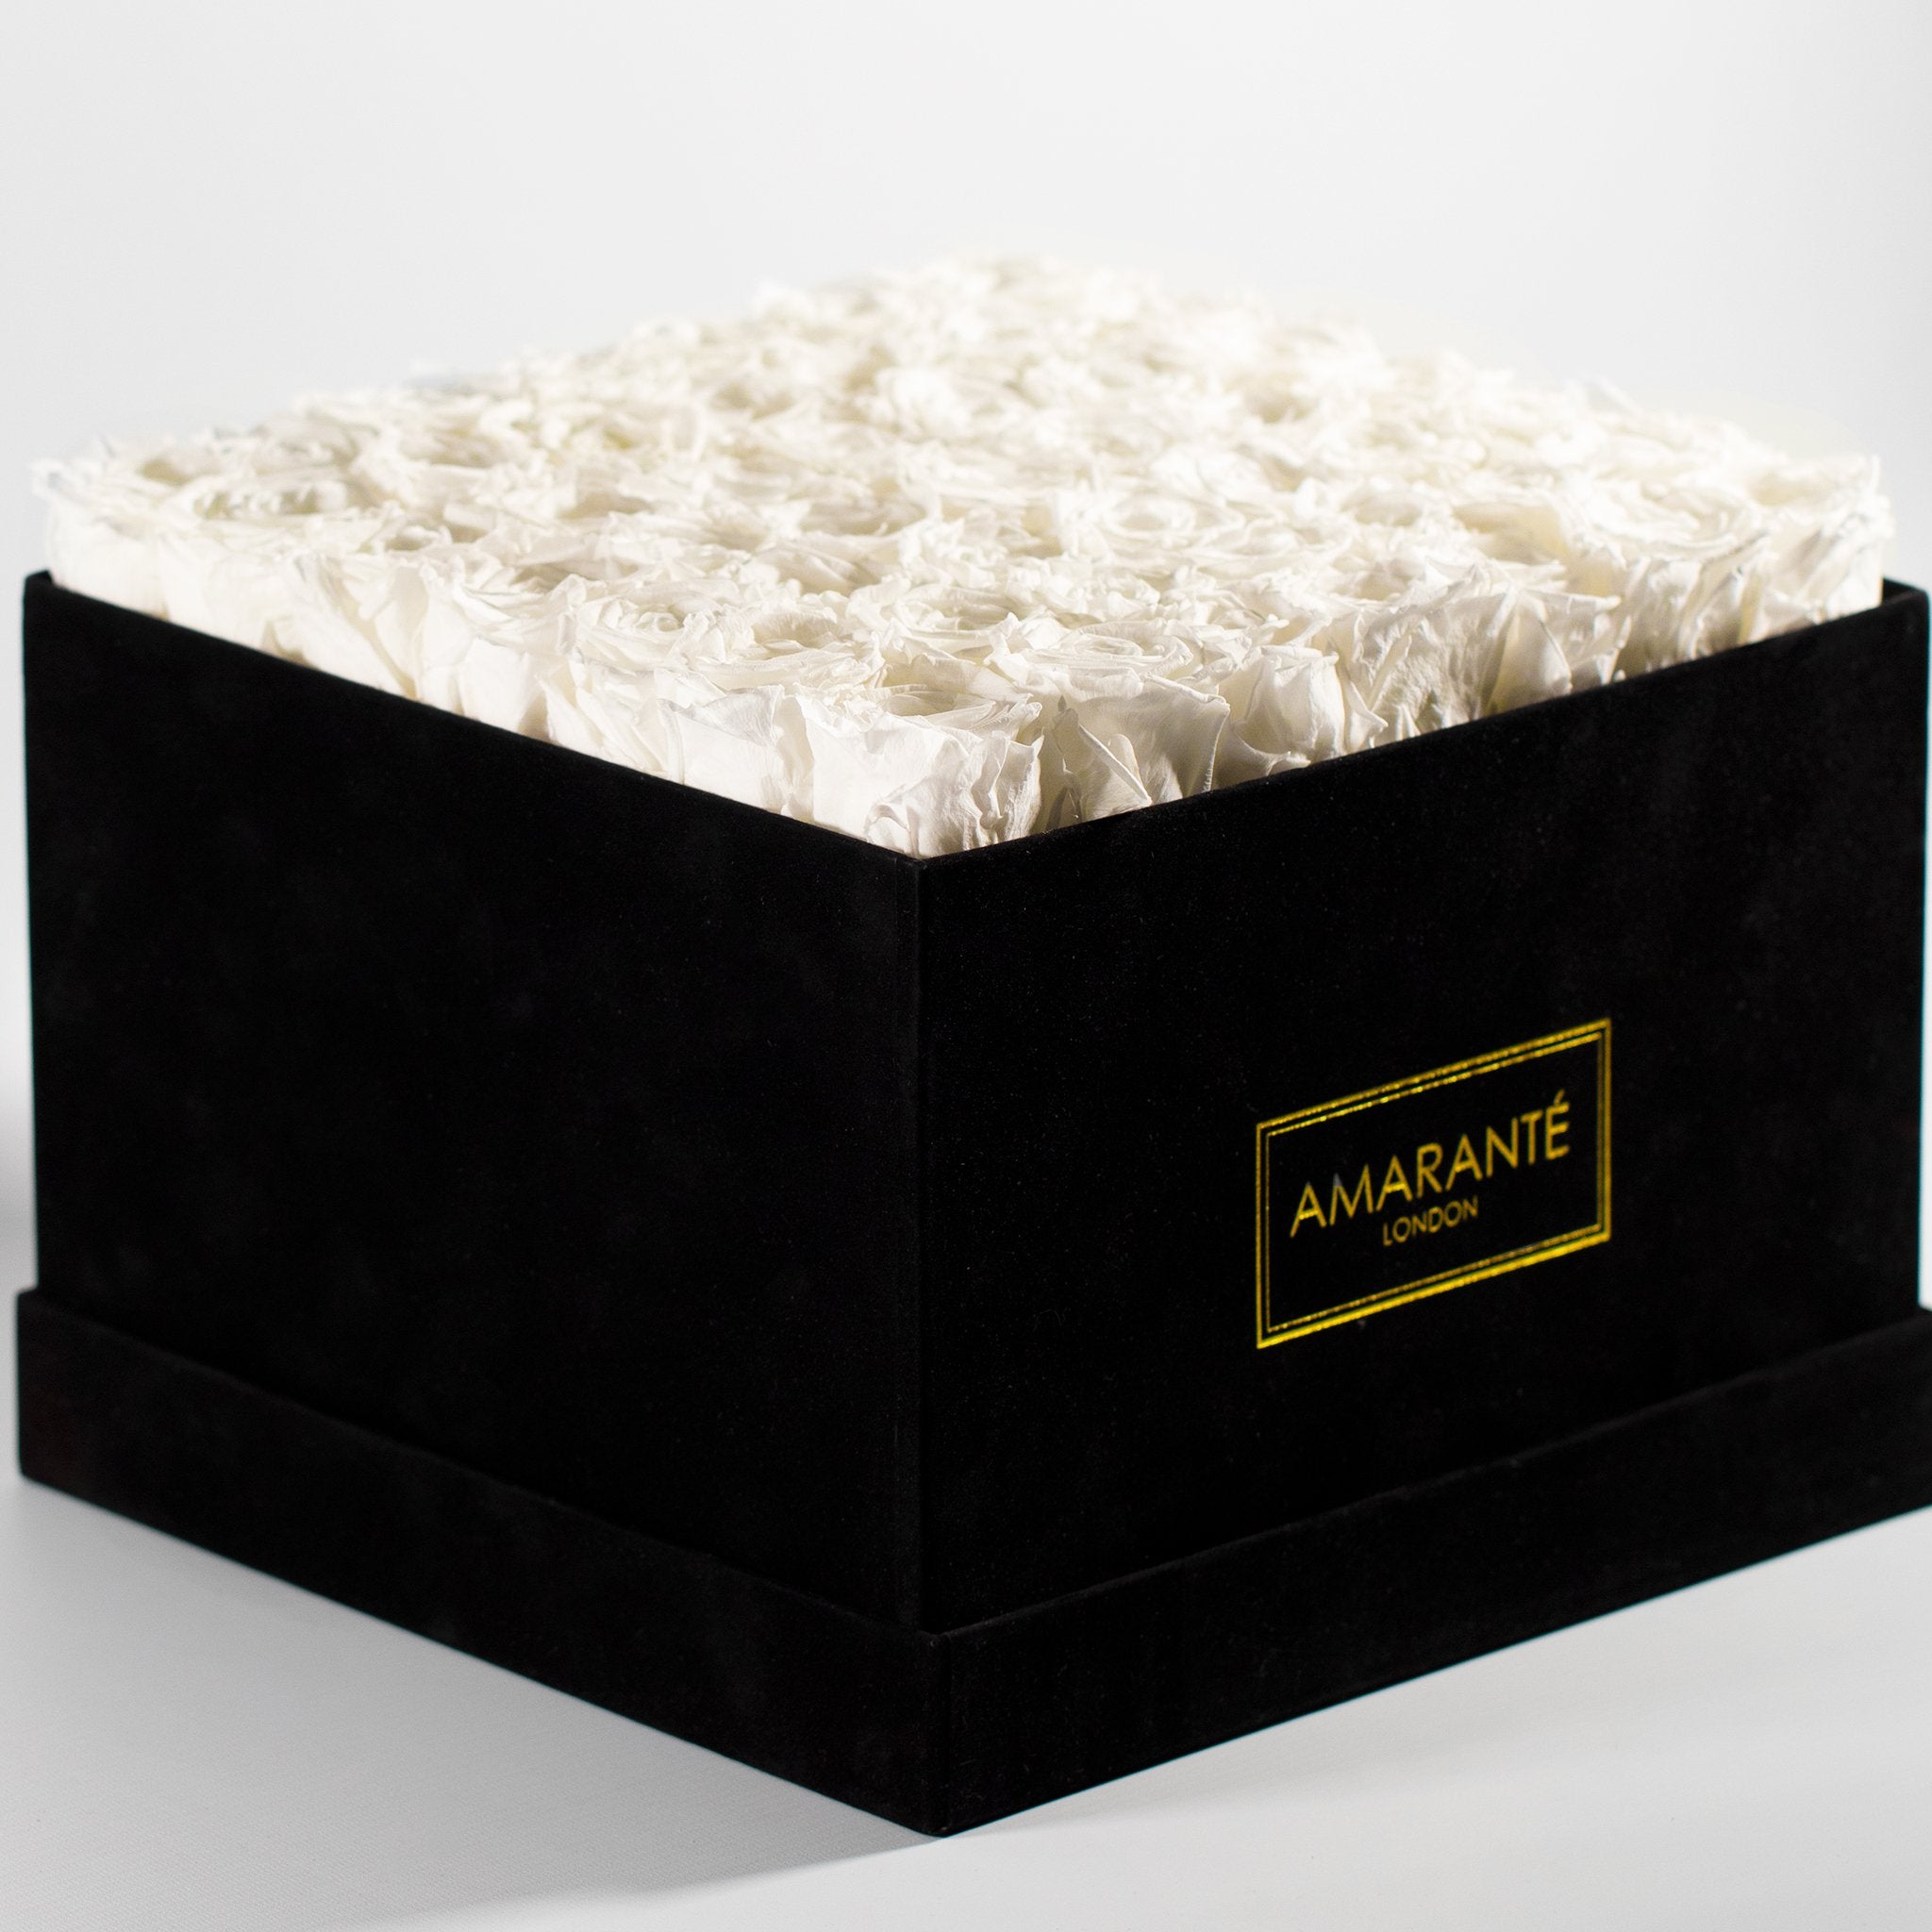 Magical white Roses in a stylish black extra large box. 